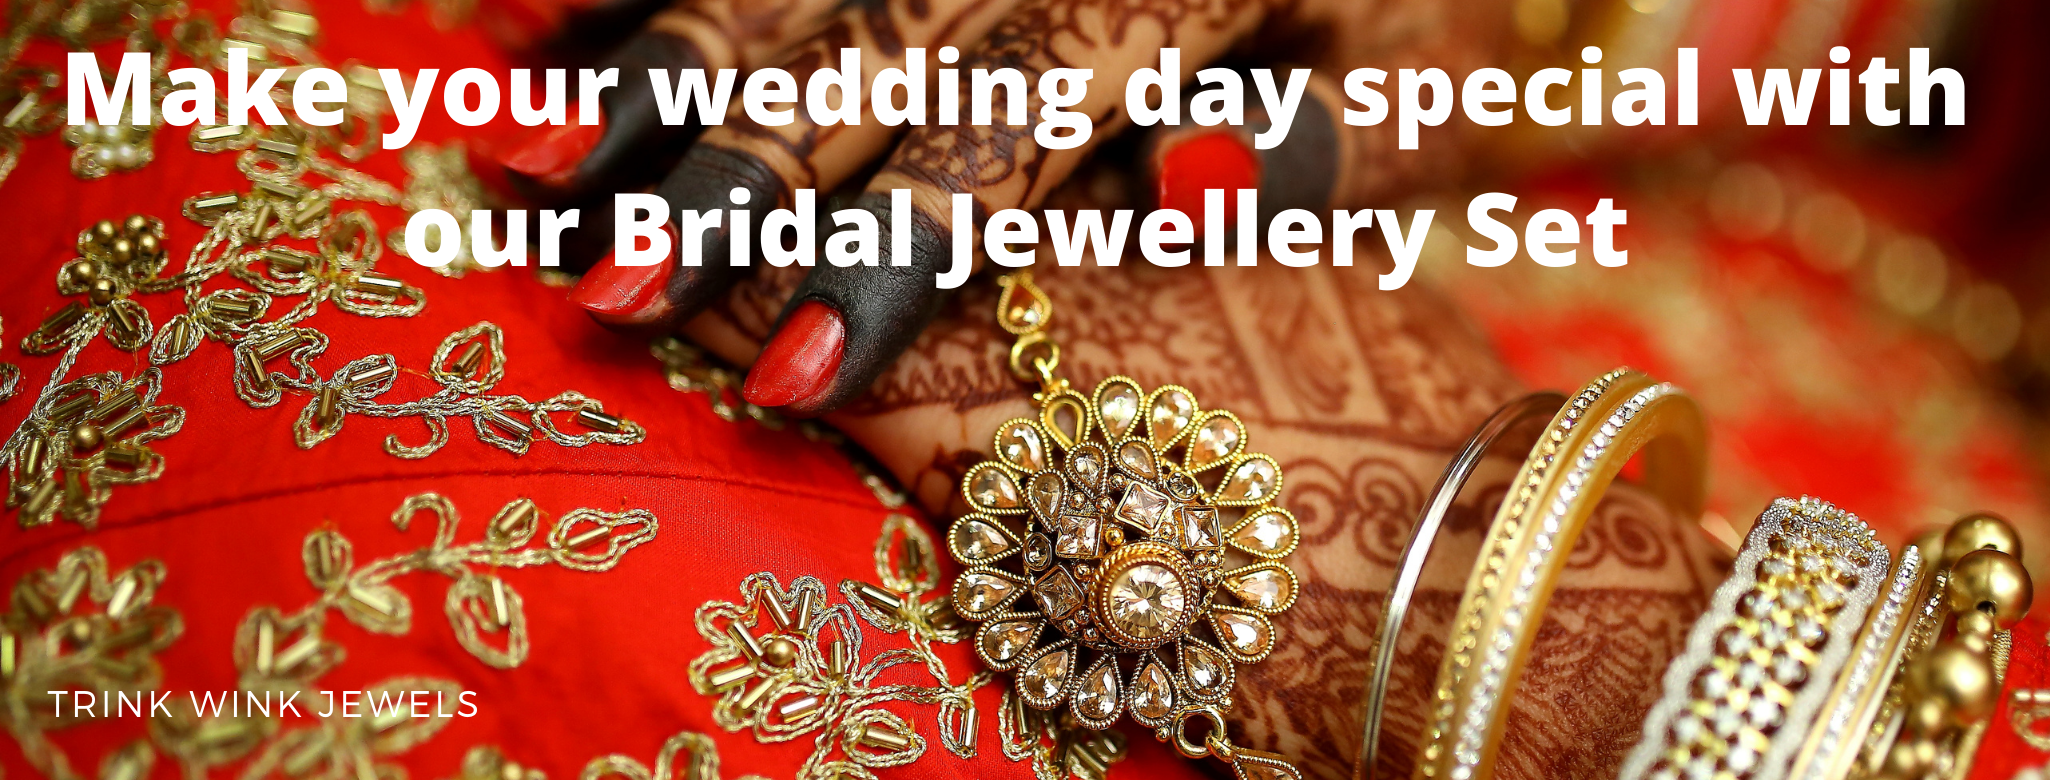 Make your wedding day special with our Bridal Jewellery Set